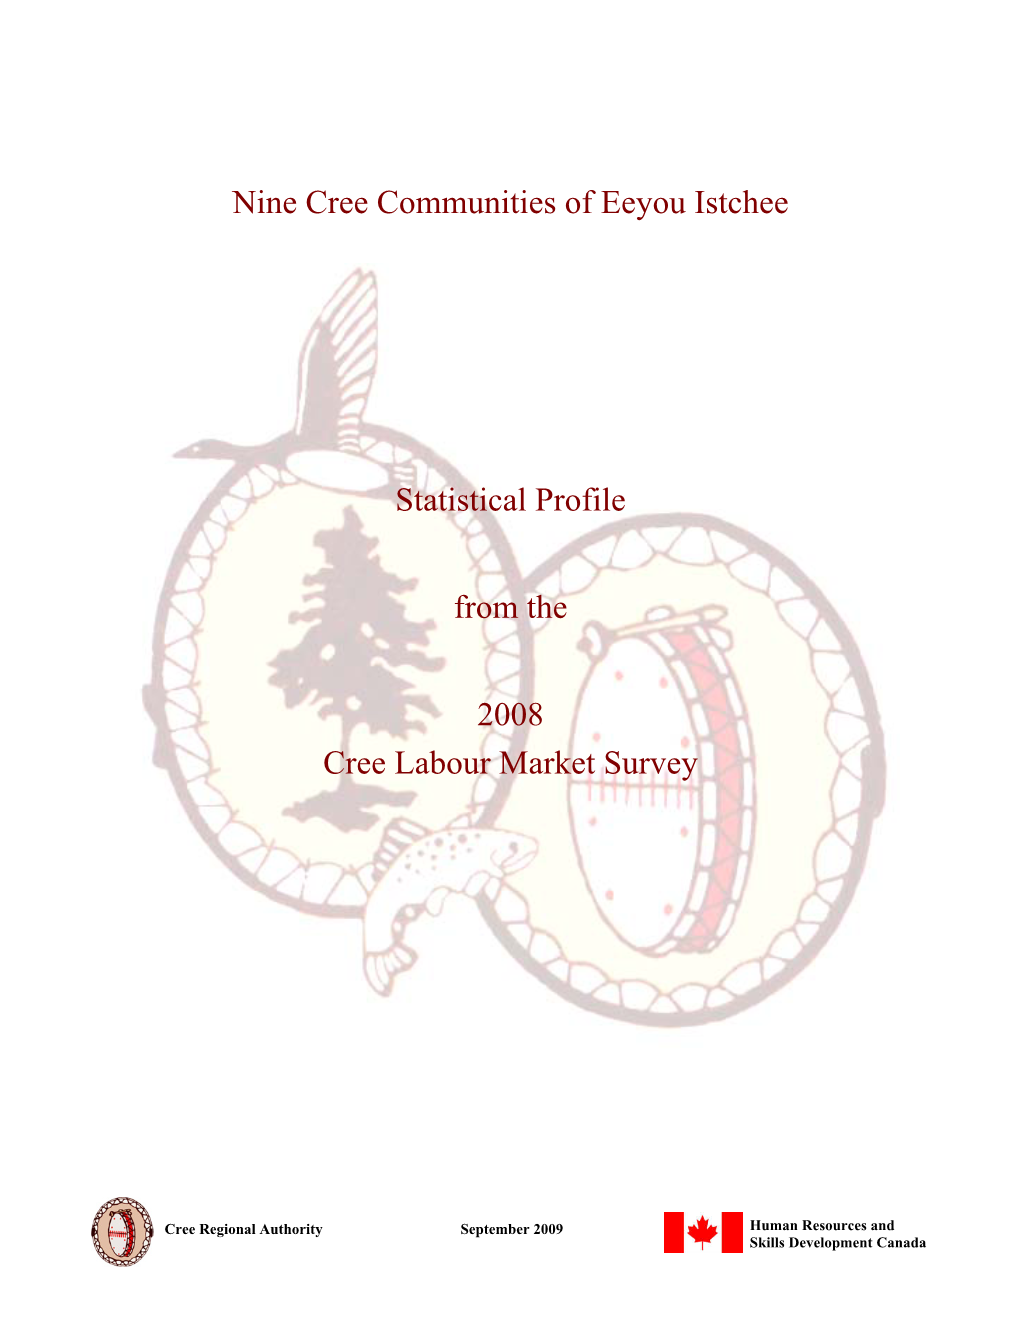 Nine Cree Communities of Eeyou Istchee Statistical Profile from The